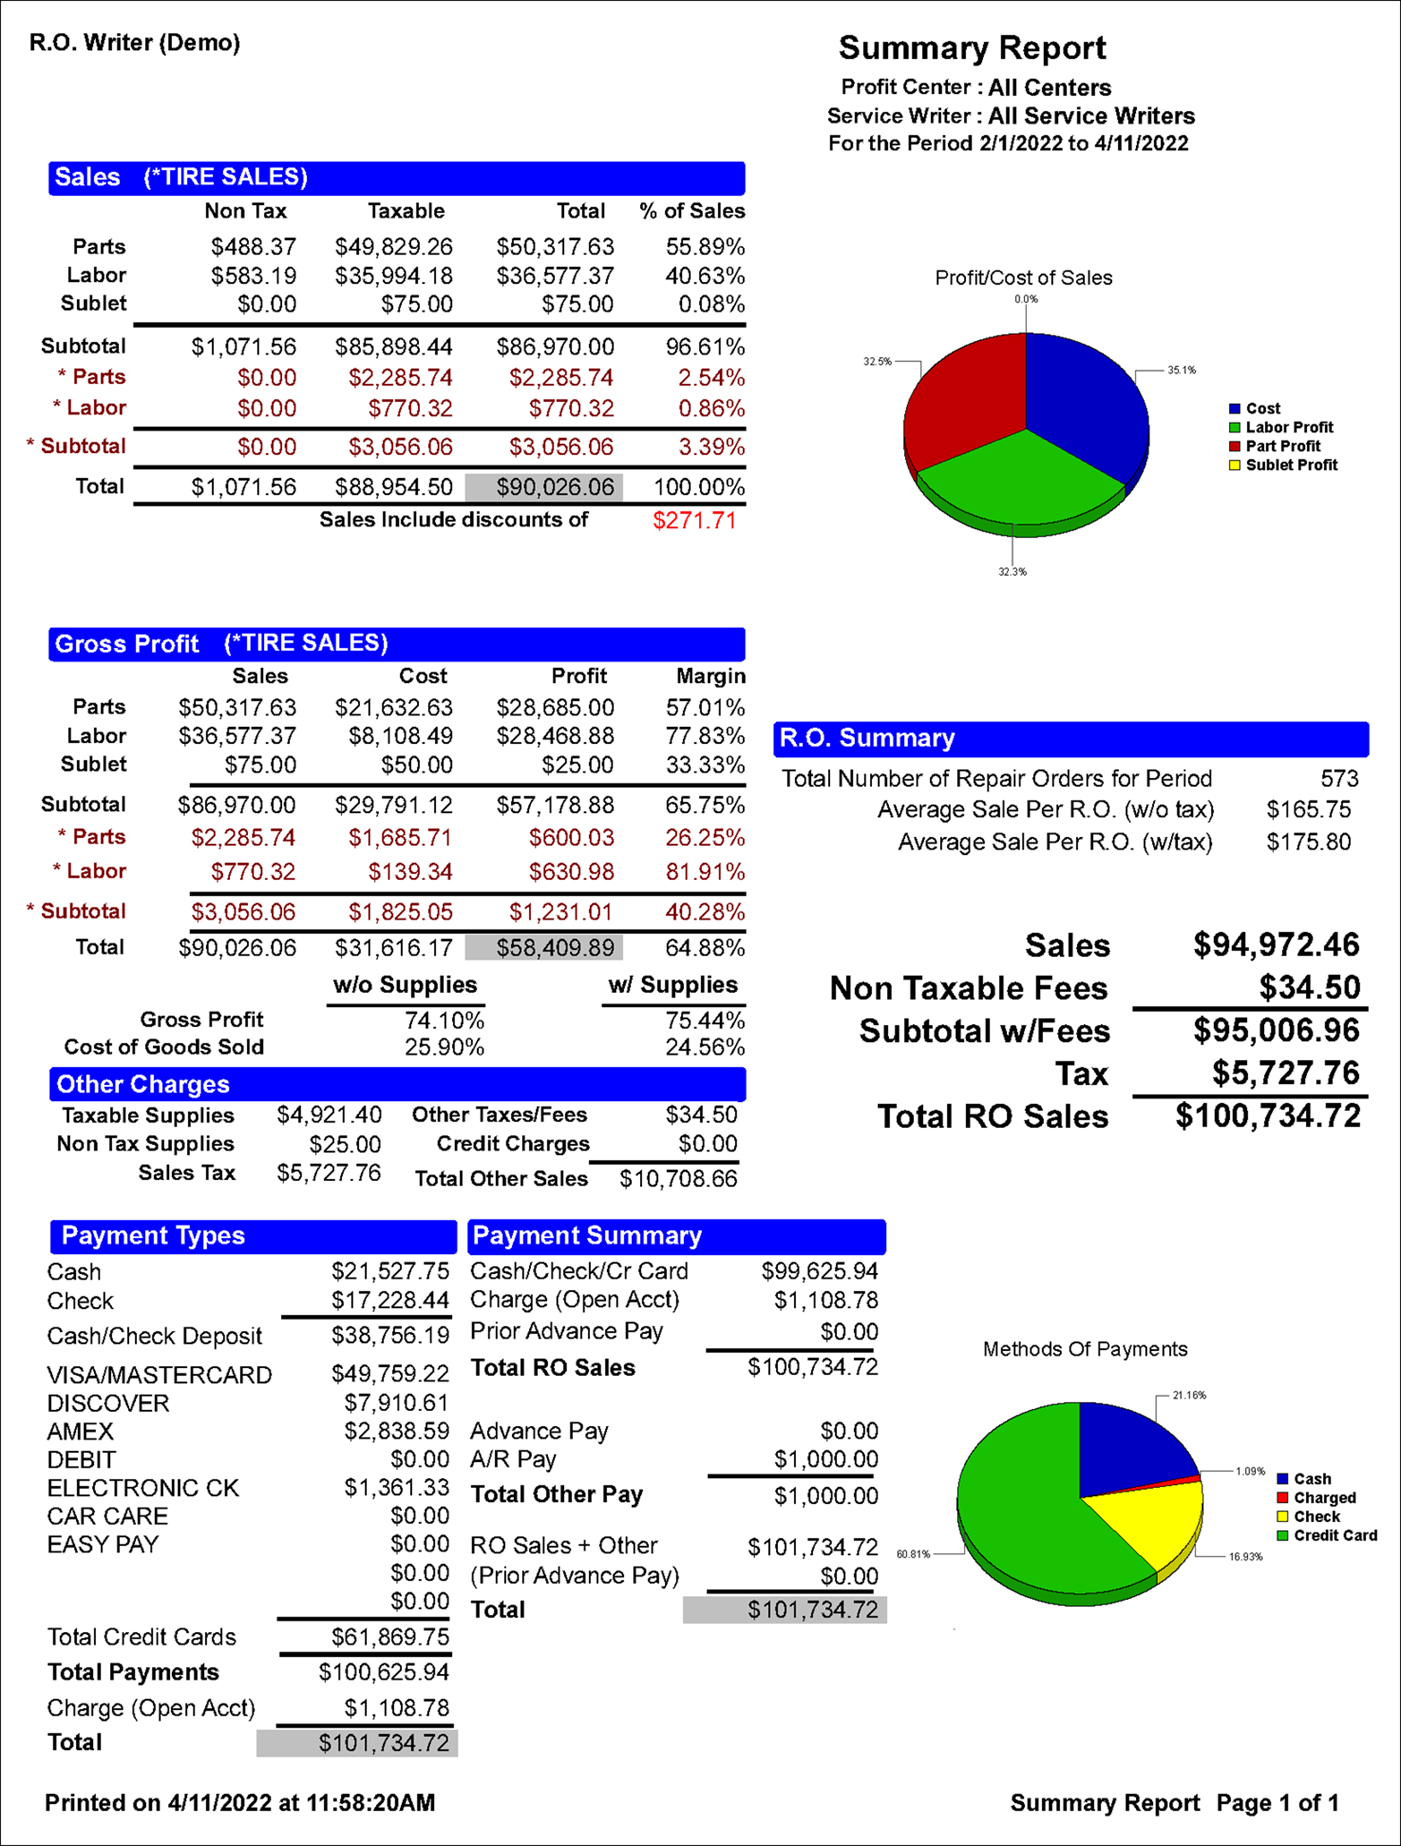 A sample of the Summary Report.